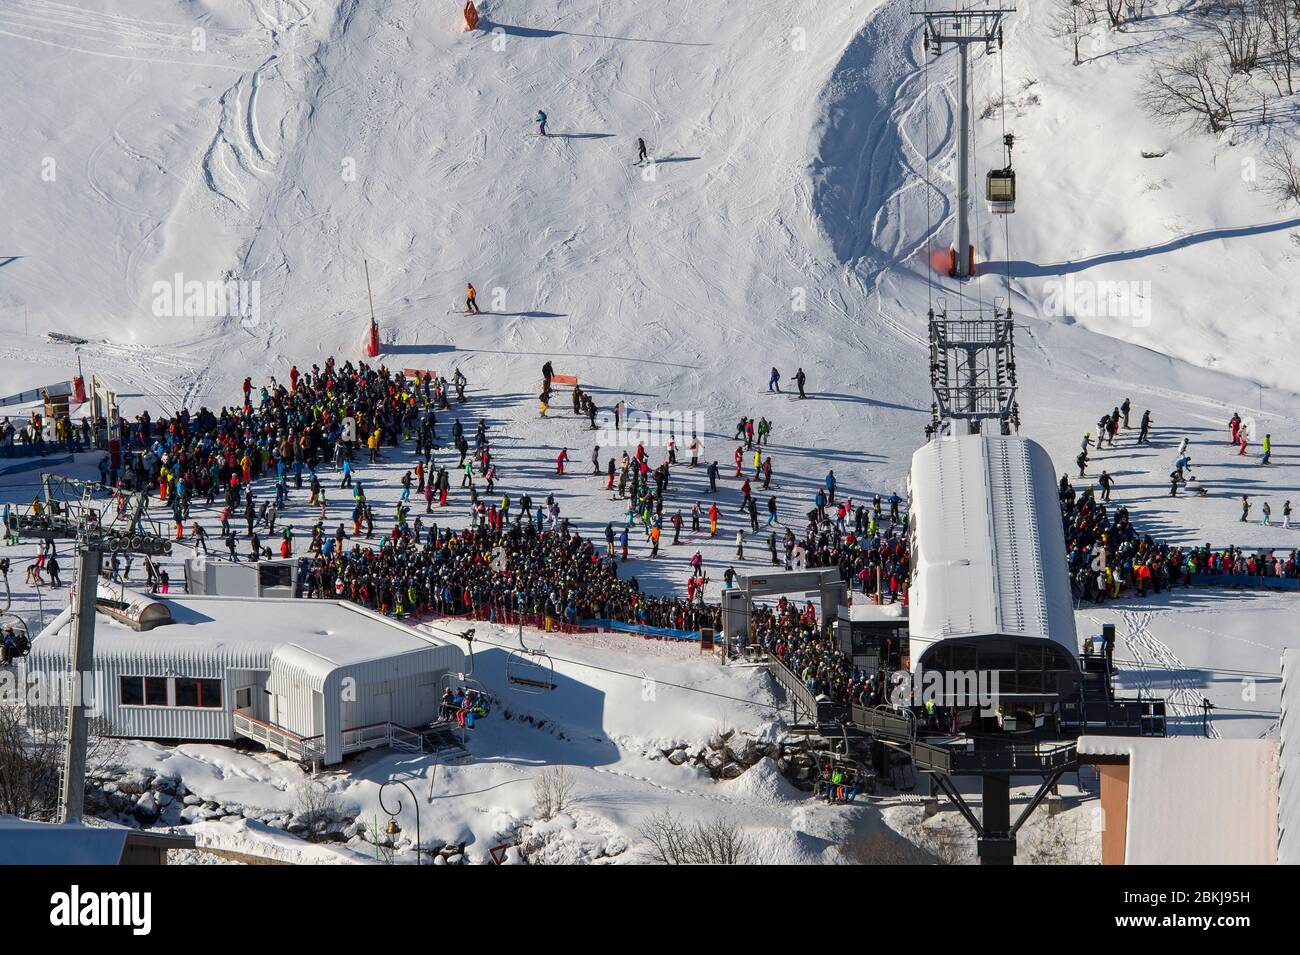 France, Savoie (73) Vanoise massif, three valleys ski area, Saint Martin de Belleville, Les Menuires, lots of people at the bottom of the station at the start of the Masse cable cars Stock Photo